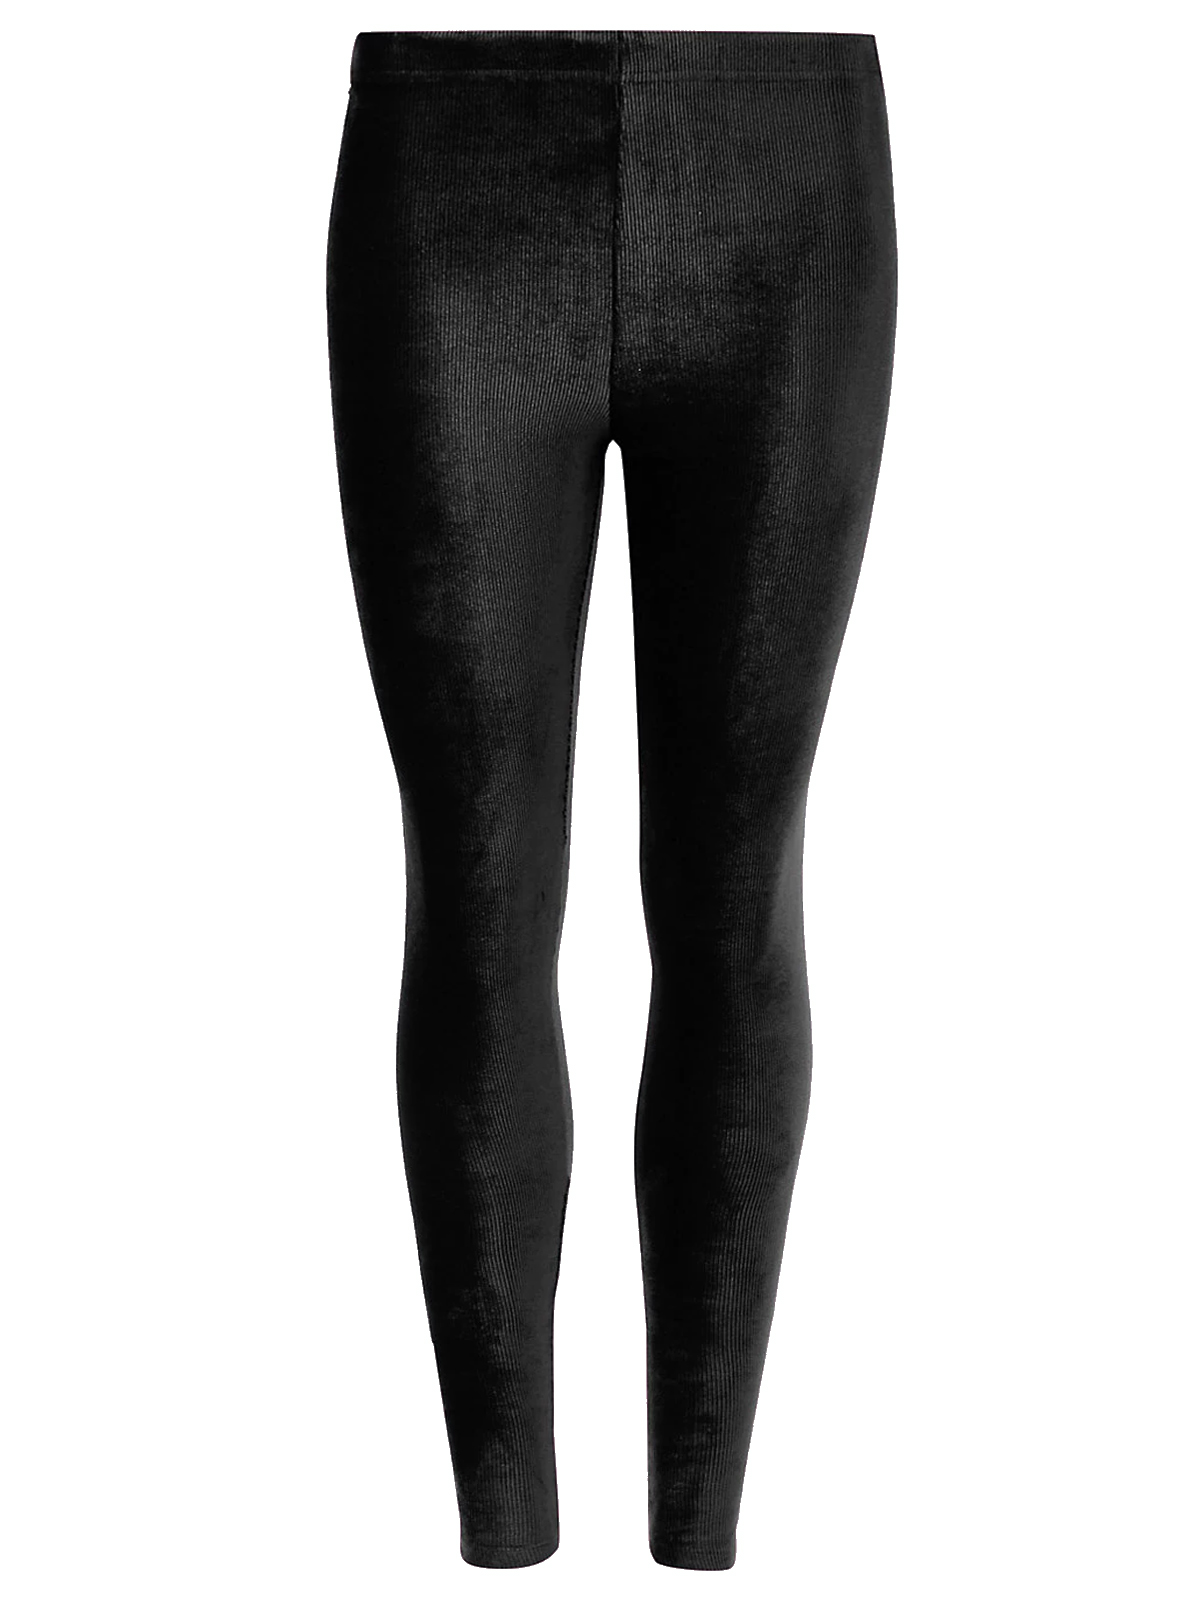 Marks and Spencer - - M&5 Collection BLACK Soft Rib Cord Skinny Fit ...